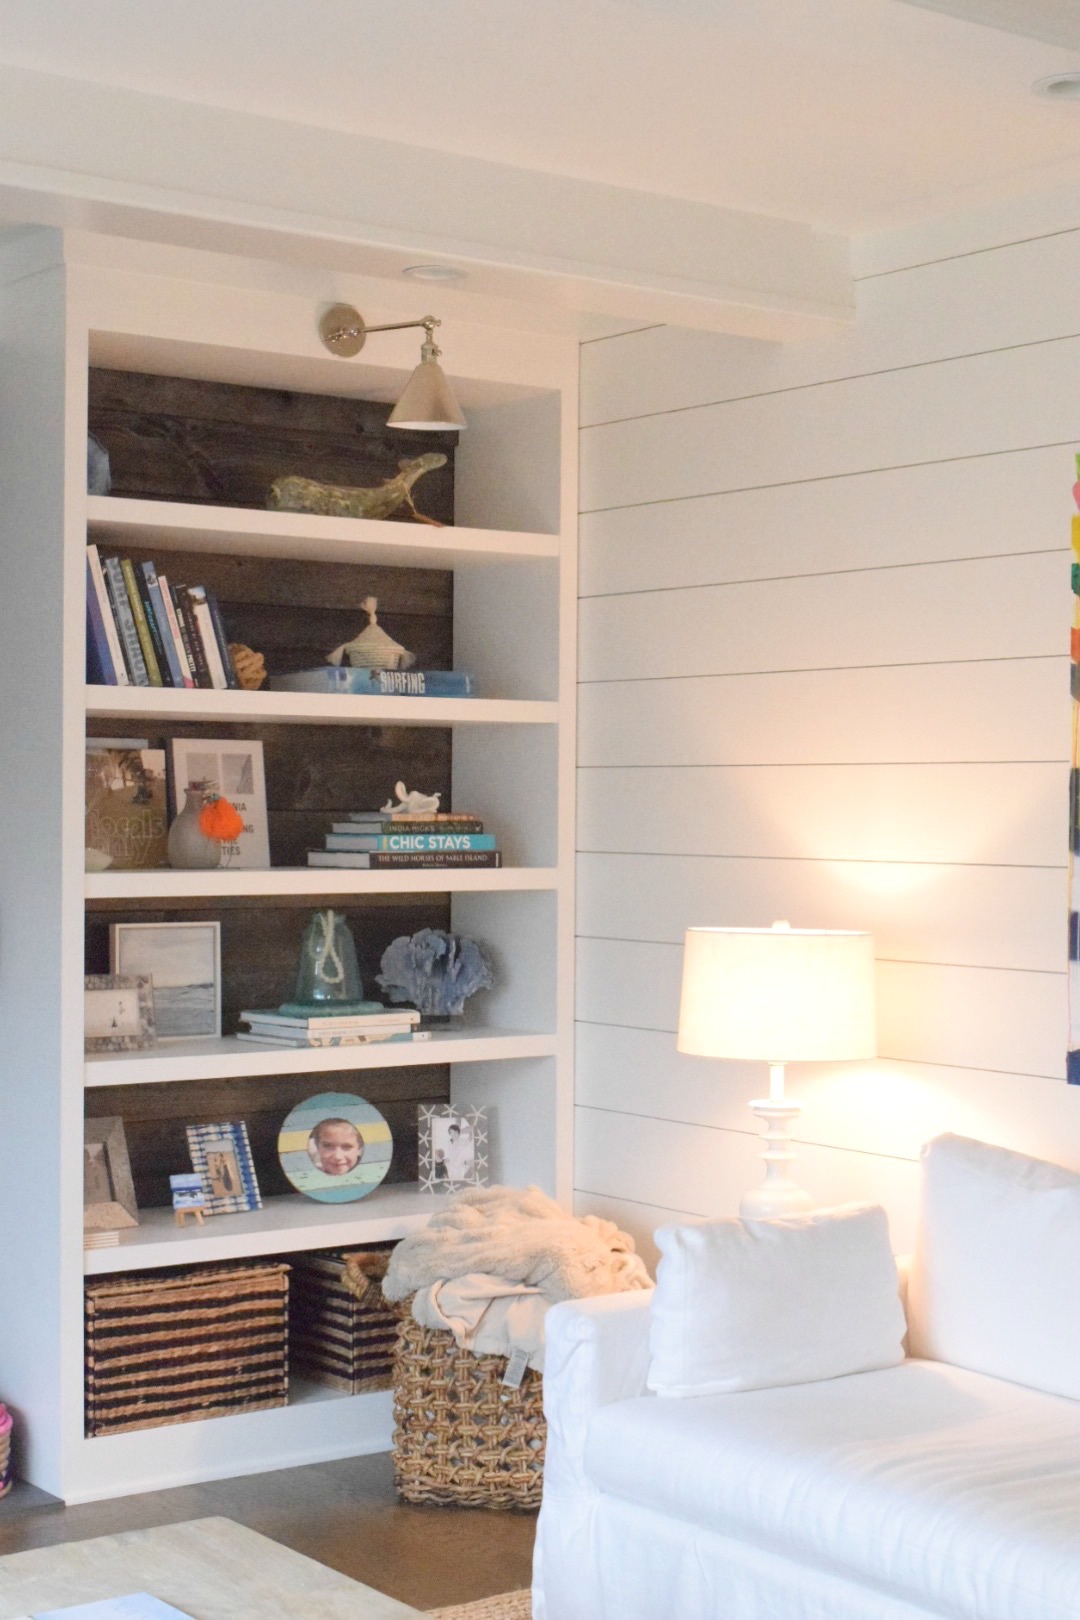 Costal Living- Come See Inside This Eclectic Beach Style Home